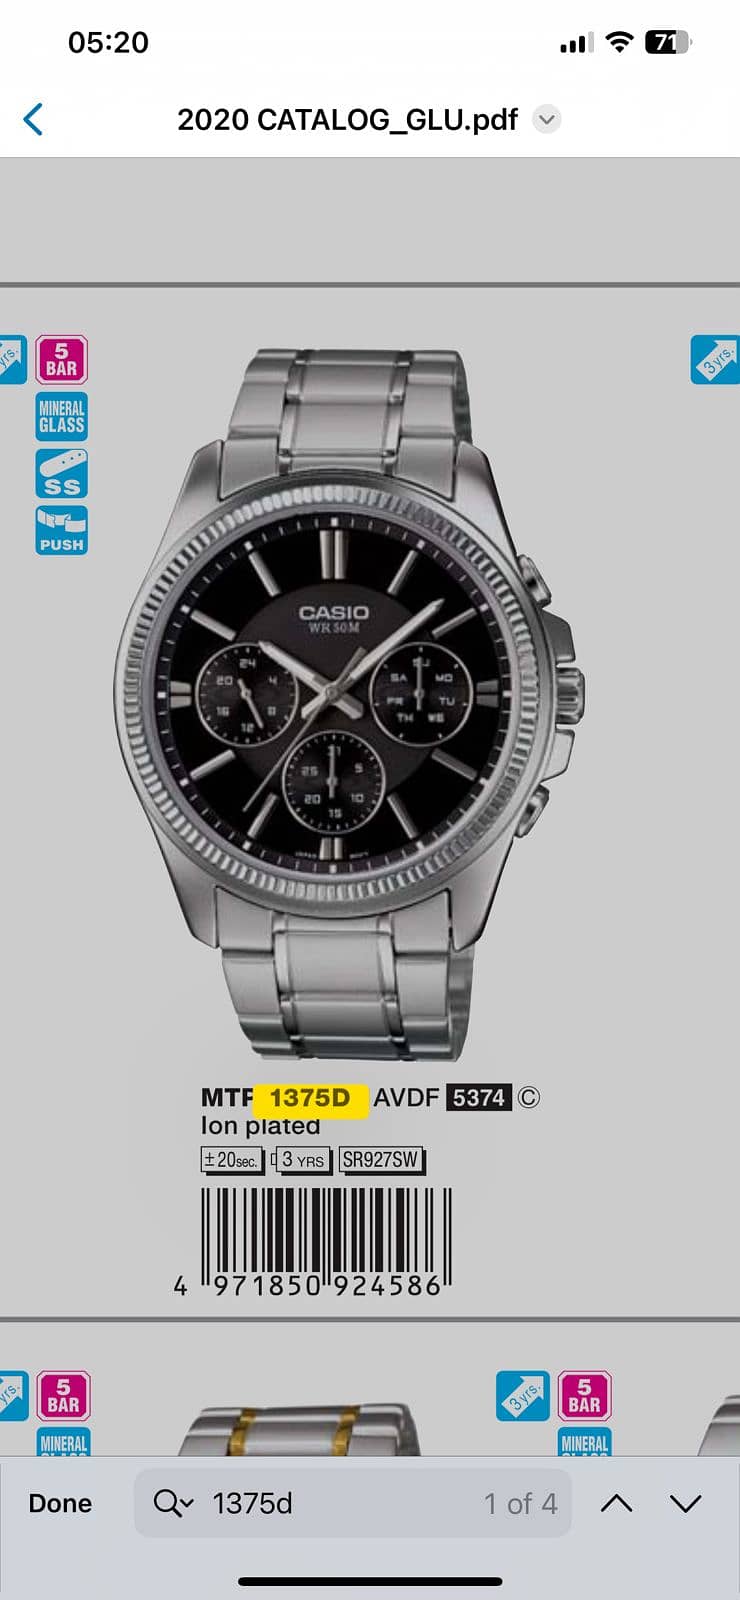 Casio watches on discounted prices 7